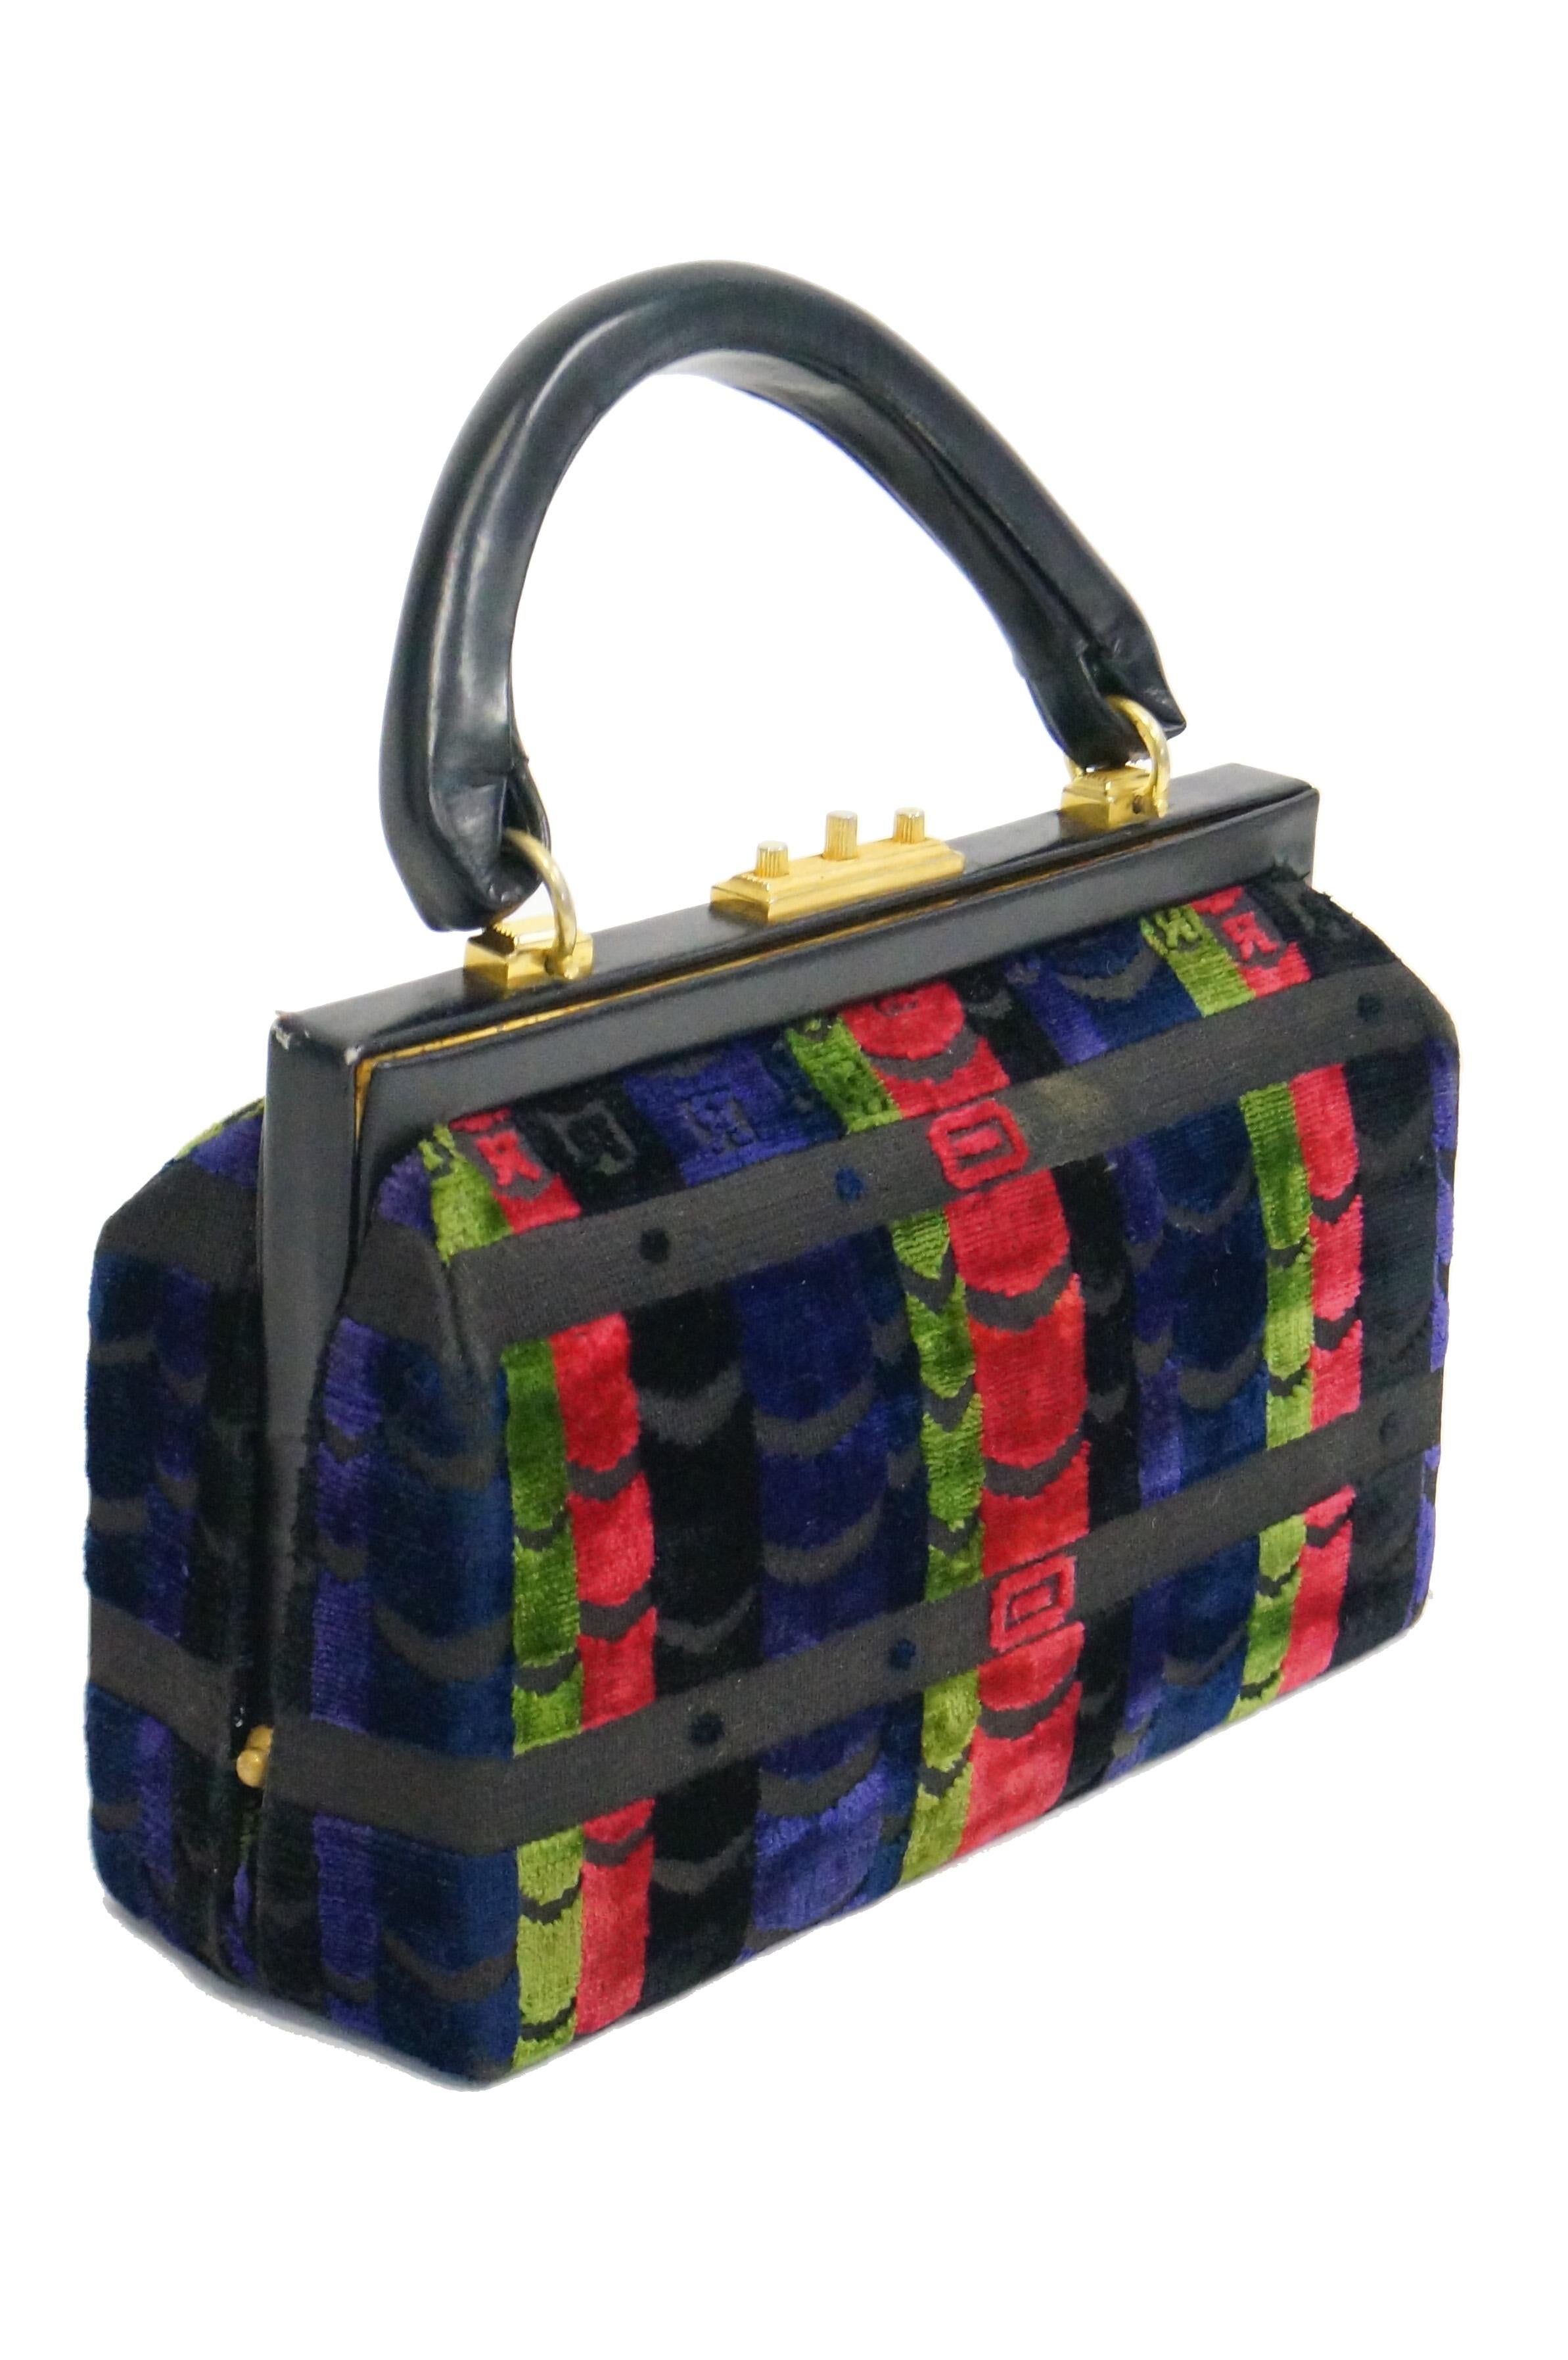 This vintage purse by Roberta di Camerino is composed of plush velvet cut in a distinct horizonal belt and buckle pattern of red, green, navy, and black stripes. The famous Roberta di Camerino 